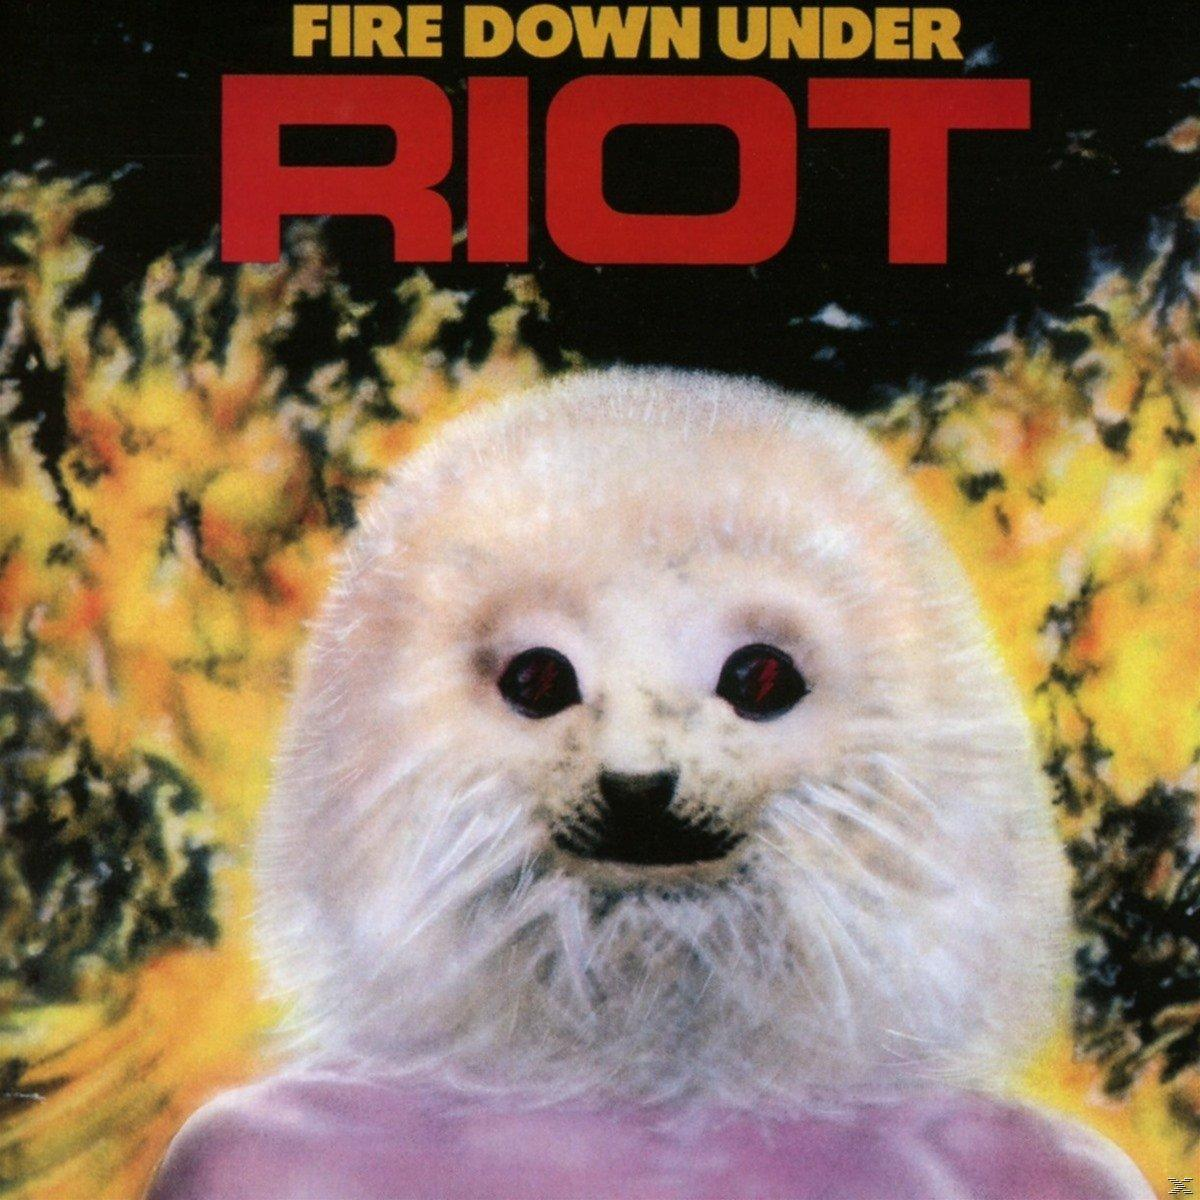 (CD) Down Riot Fire - (Collector\'s Edition) Under -